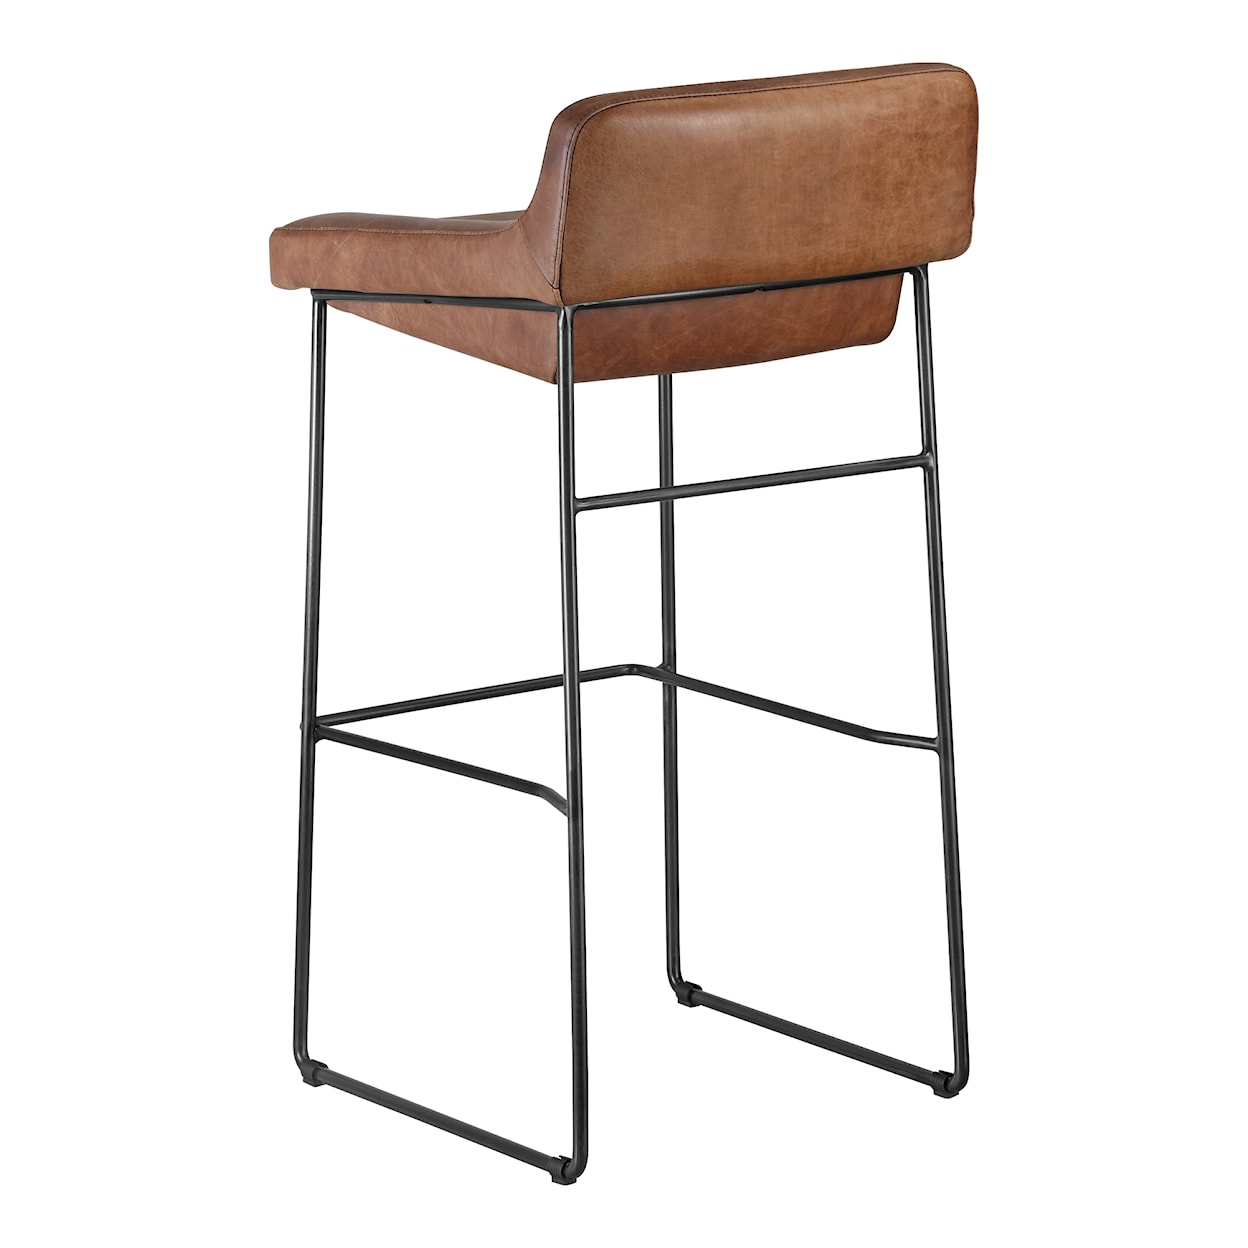 Moe's Home Collection Starlet Starlet Barstool Open Road Brown Leather-M2